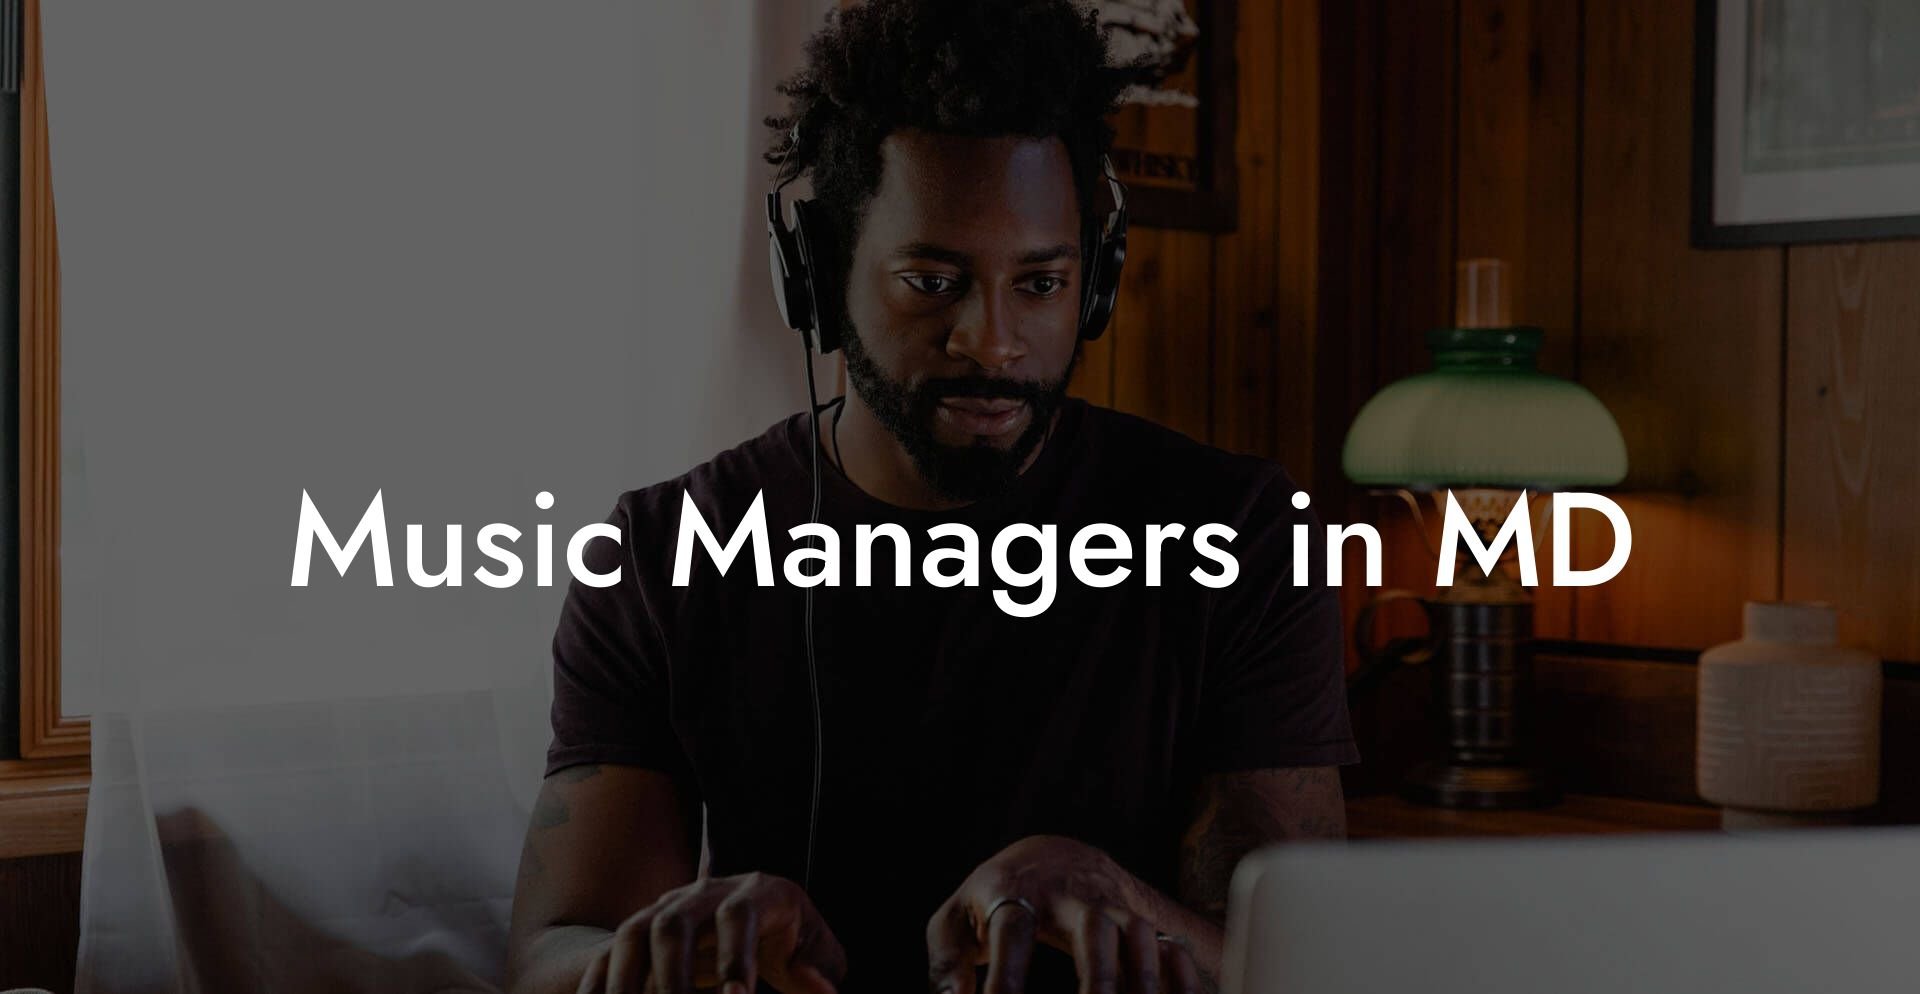 Music Managers in MD